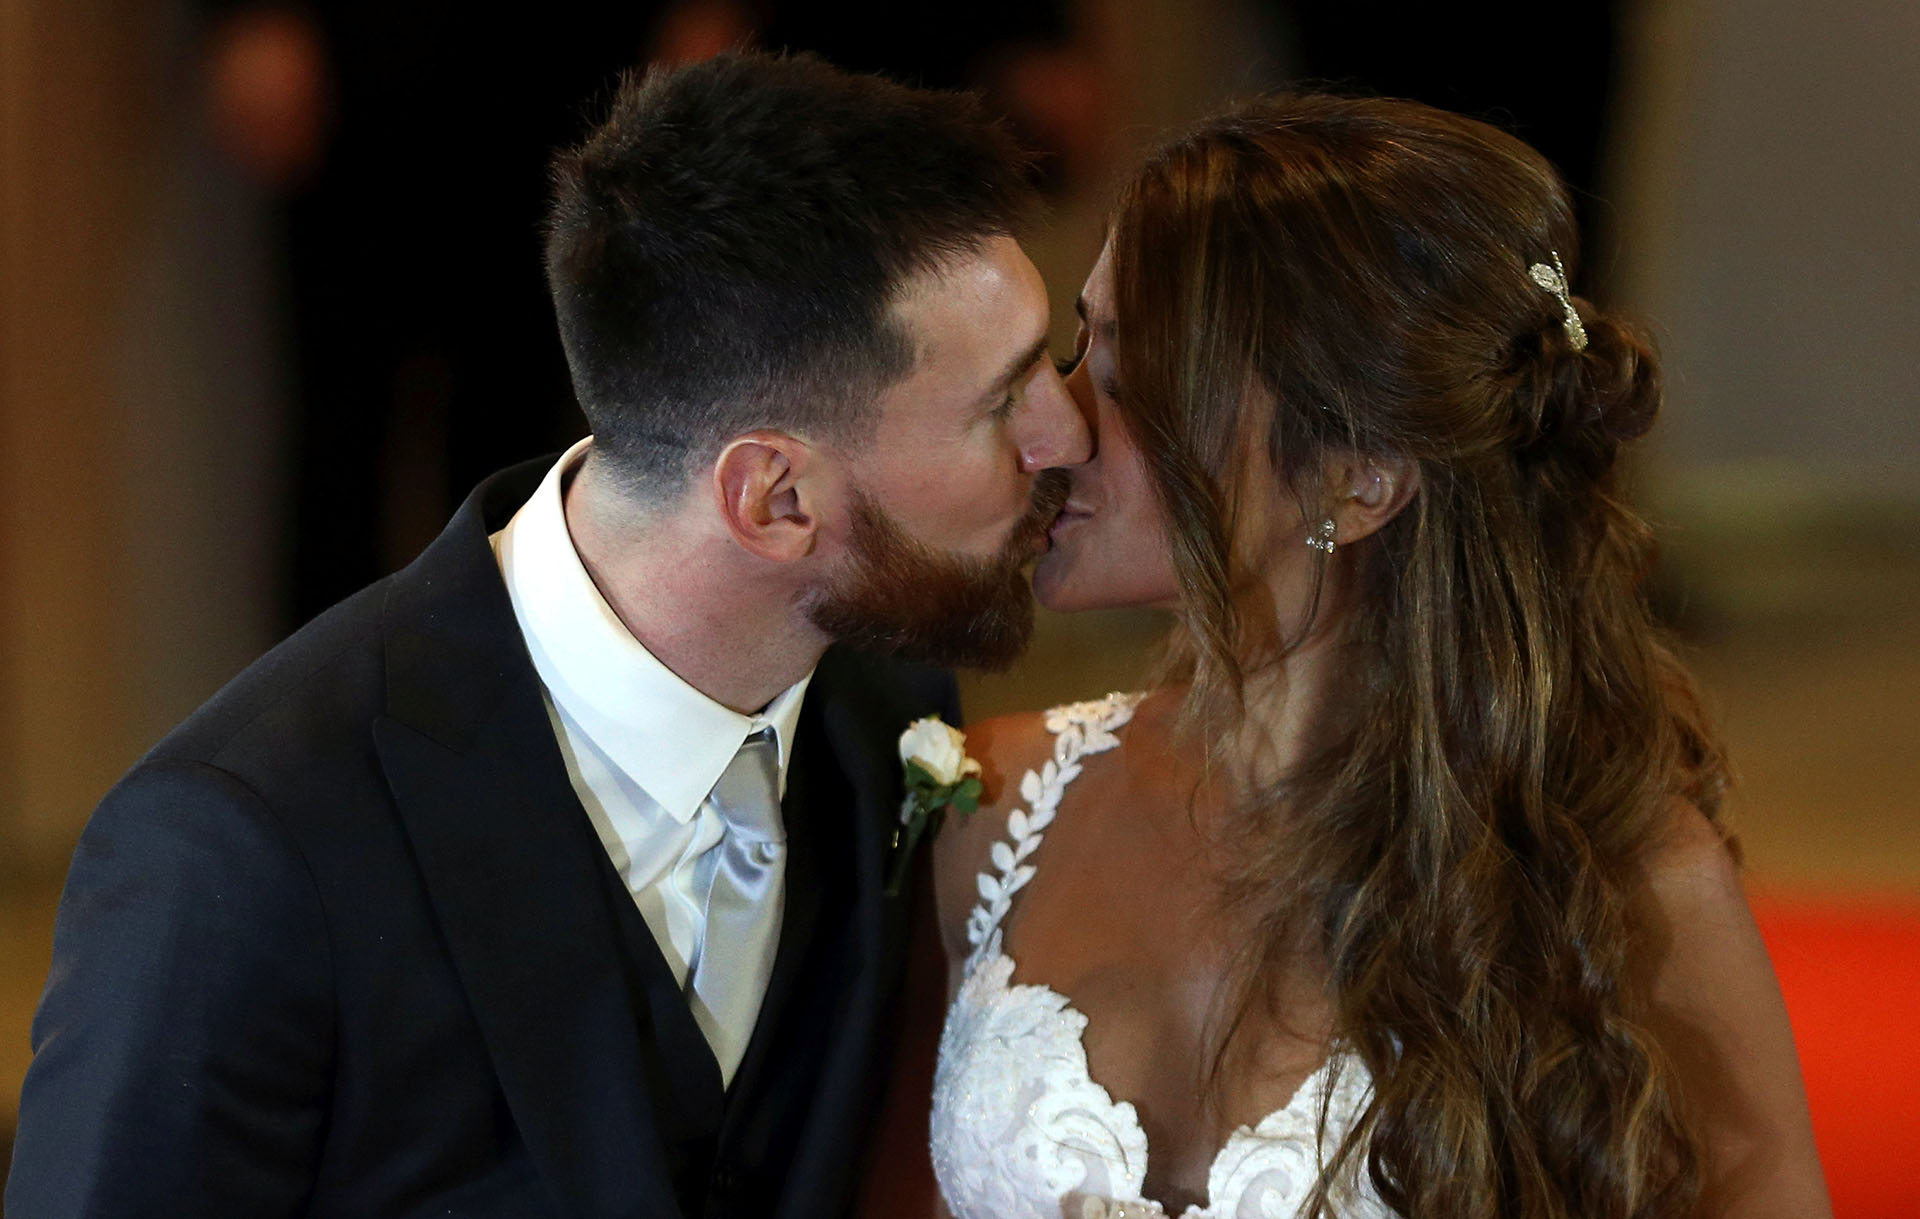 Argentine soccer player Lionel Messi and his wife Antonela Roccuzzo kiss as they pose at their wedding in Rosario, Argentina, June 30, 2017. REUTERS/Marcos Brindicci     TPX IMAGES OF THE DAY